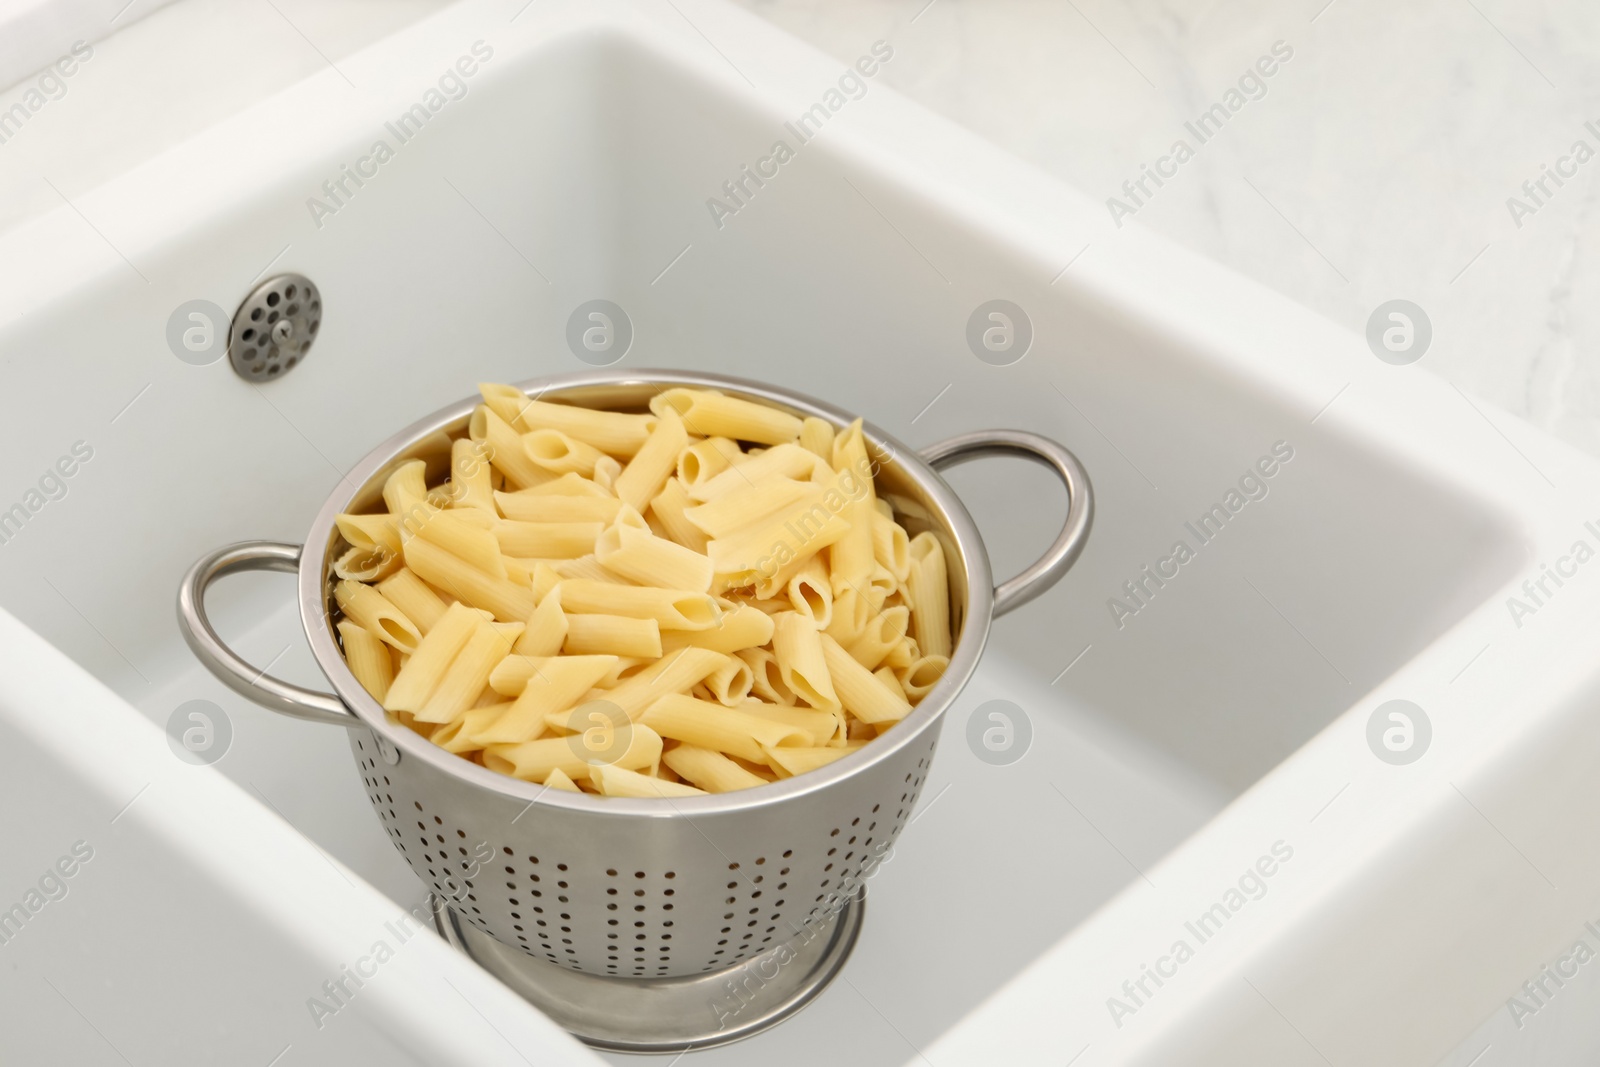 Photo of Metal colander with cooked pasta in sink